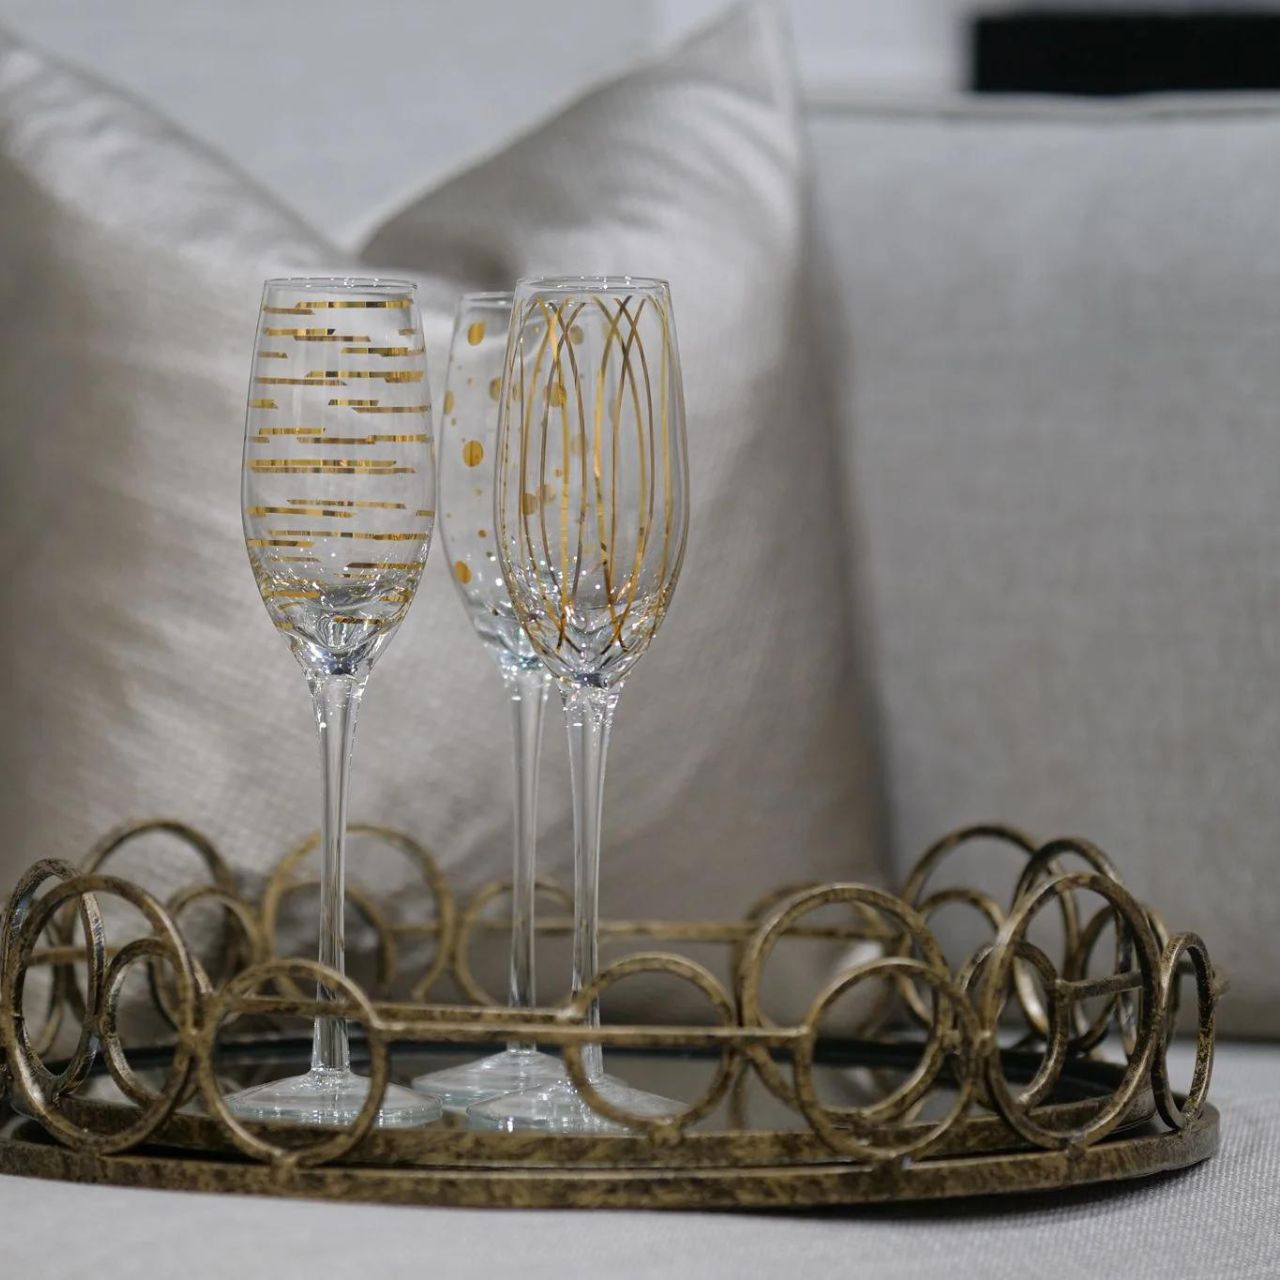 Mindy Brownes Remy Trays Set of 2  Set of two mirrored trays, Serve your drinks or nibbles in style on this deco mirror tray. Beautifully constructed from glass and metal, it's sure to make an impact. Antique gold in finish.